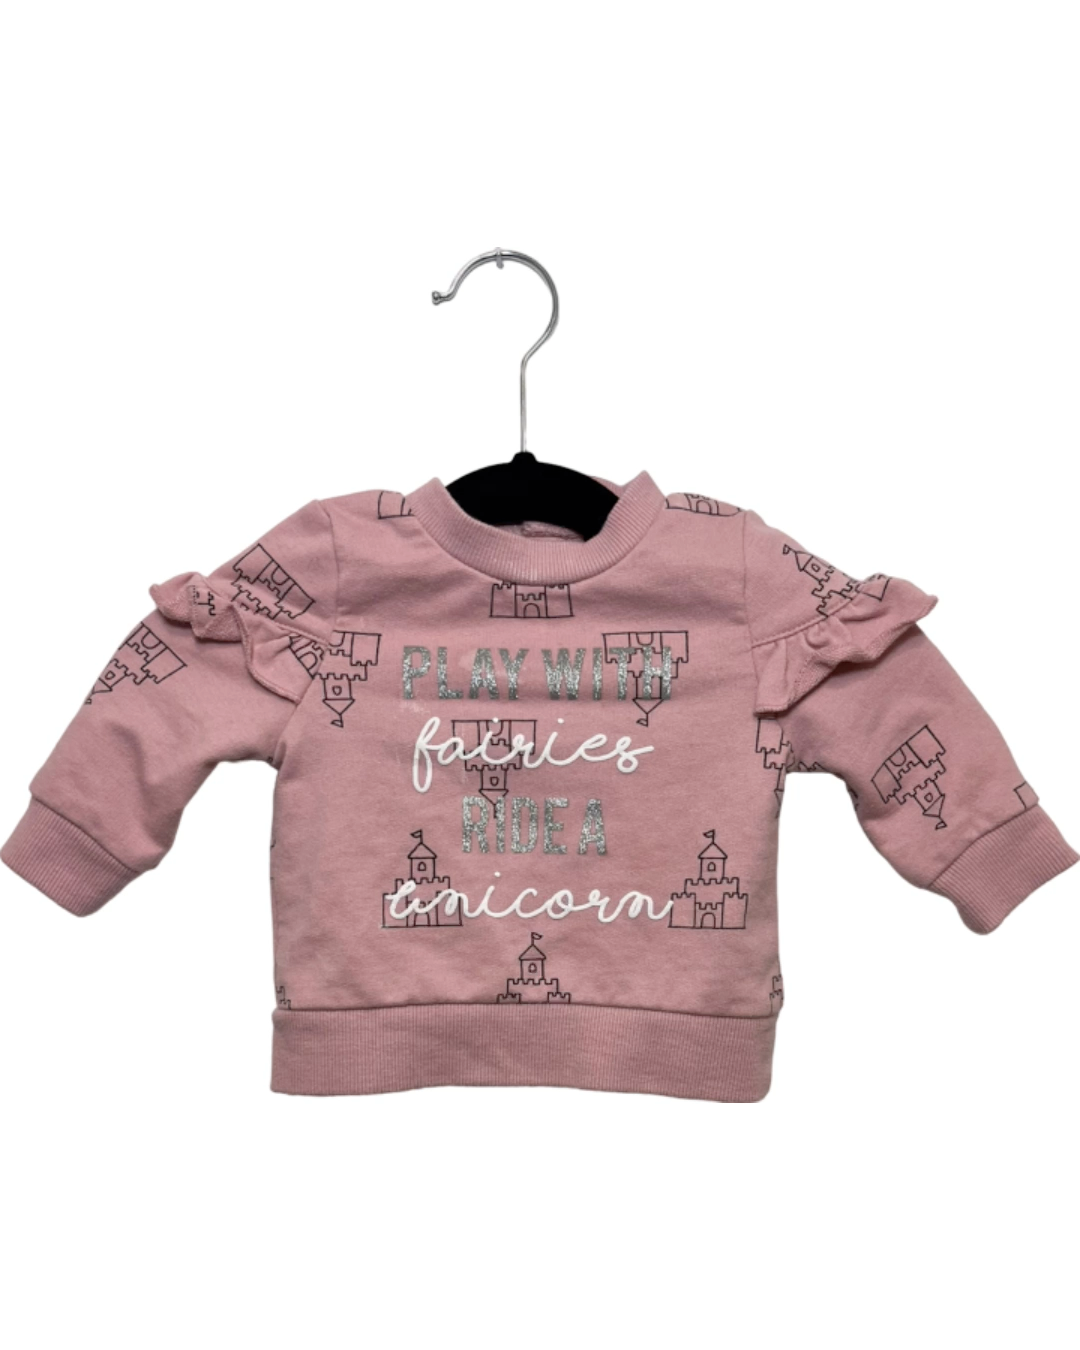 Play with Fairies, Ride a Unicorn sweater (3M)